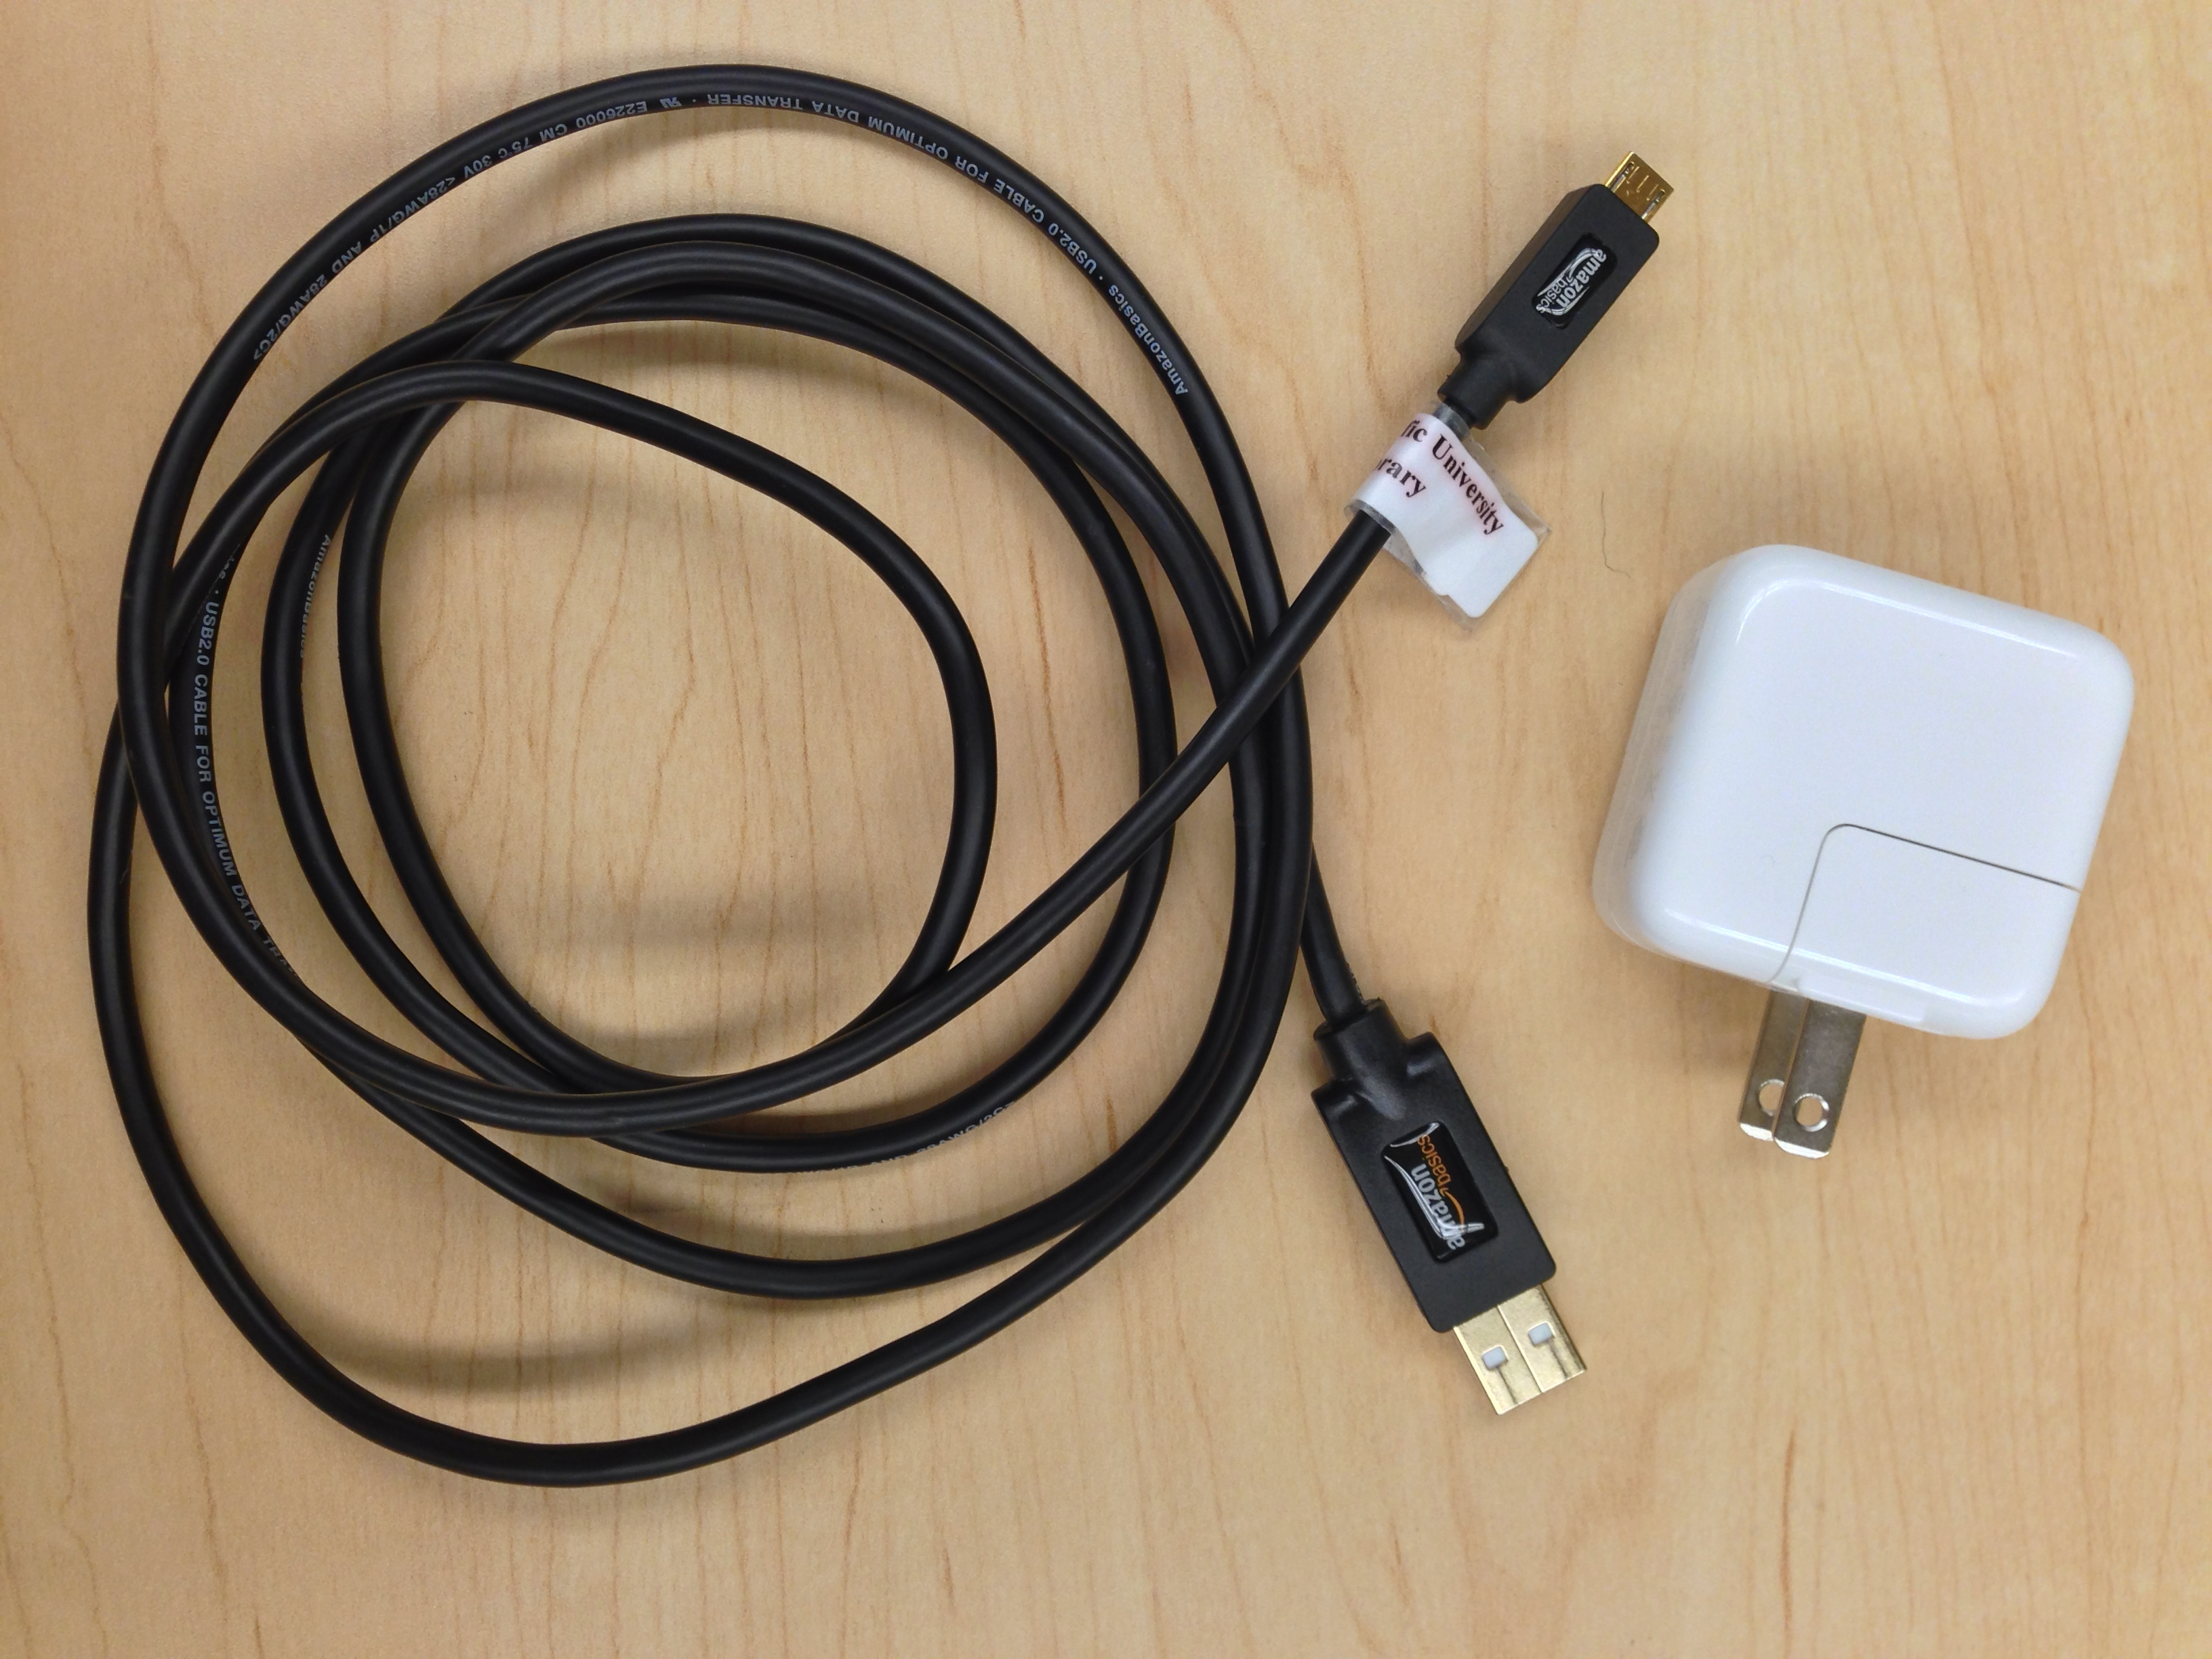 Micro USB cable and power adapter